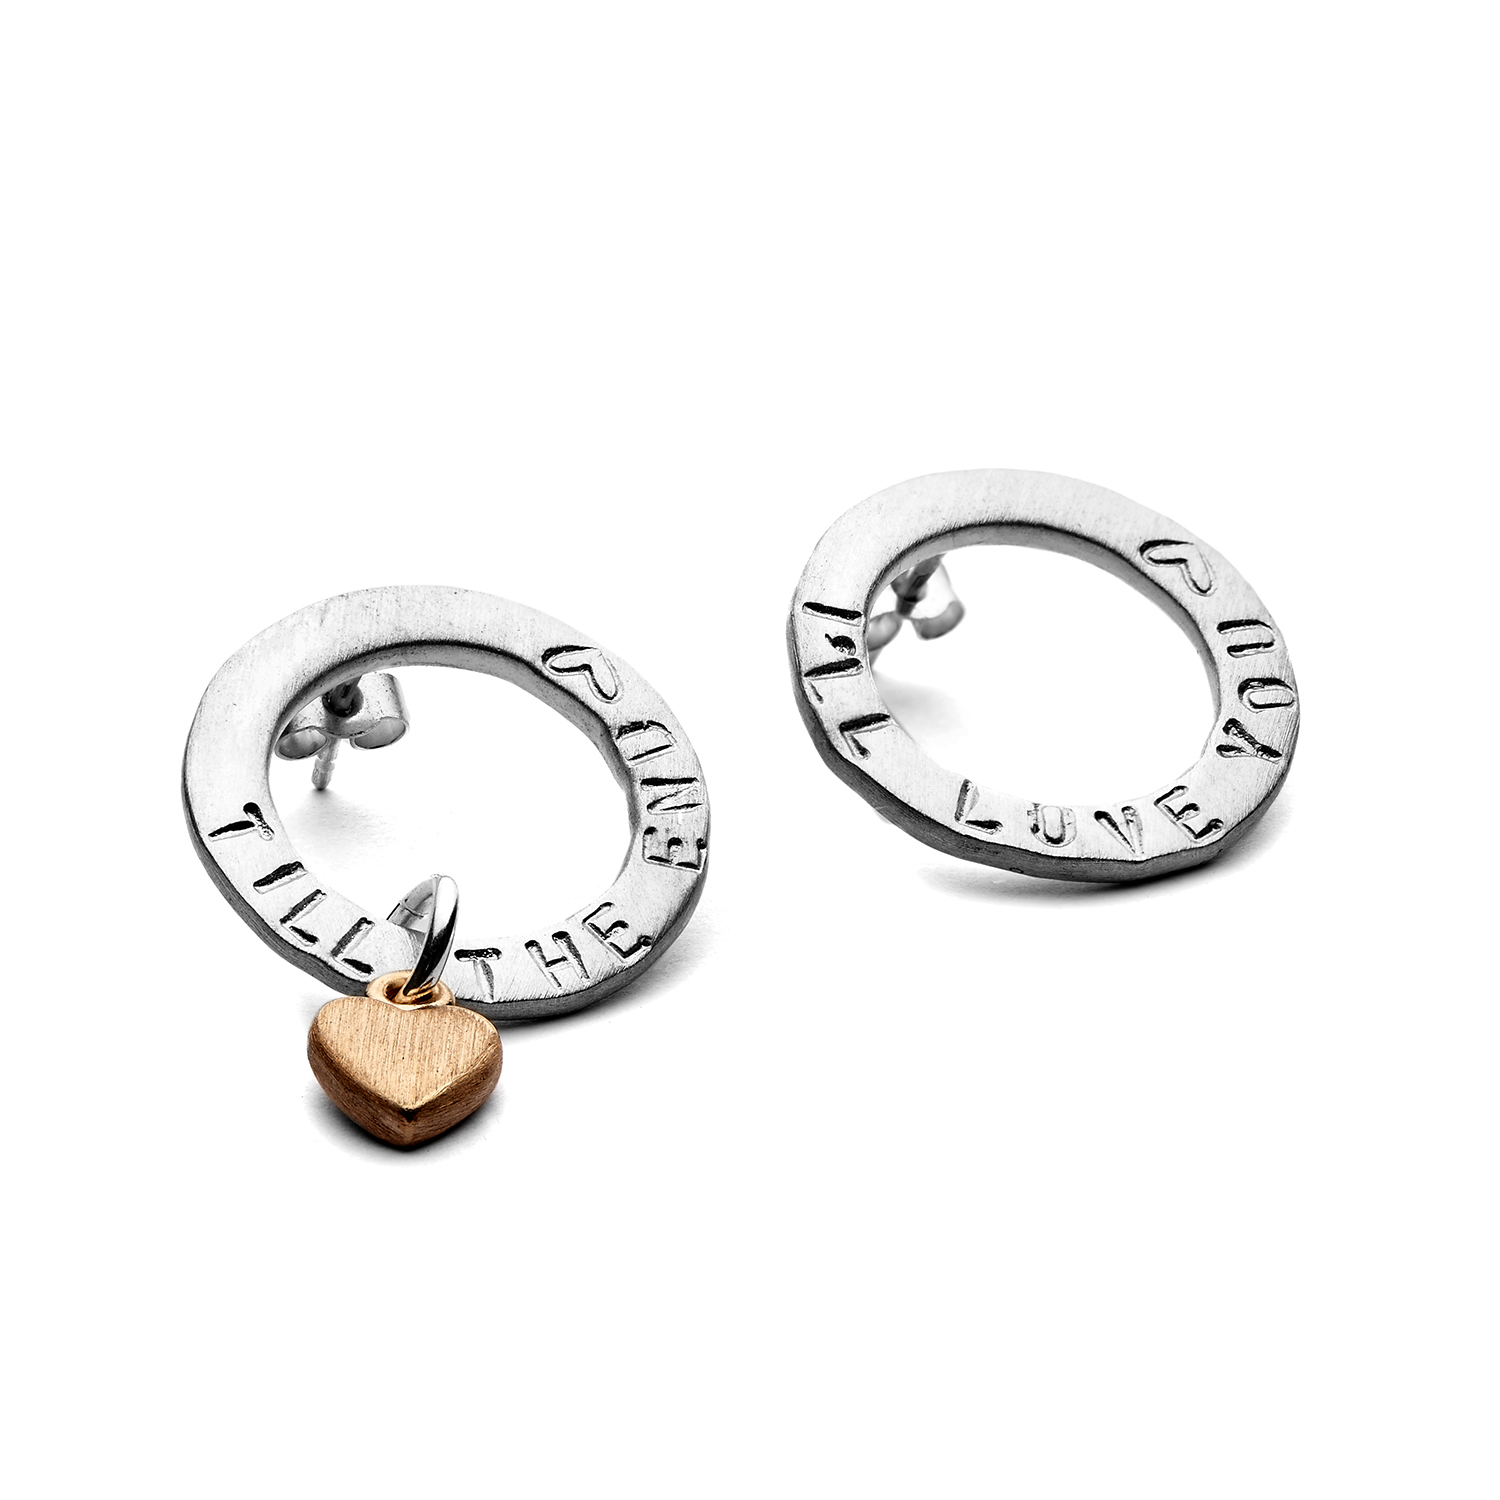 personalised sterling silver halo earring